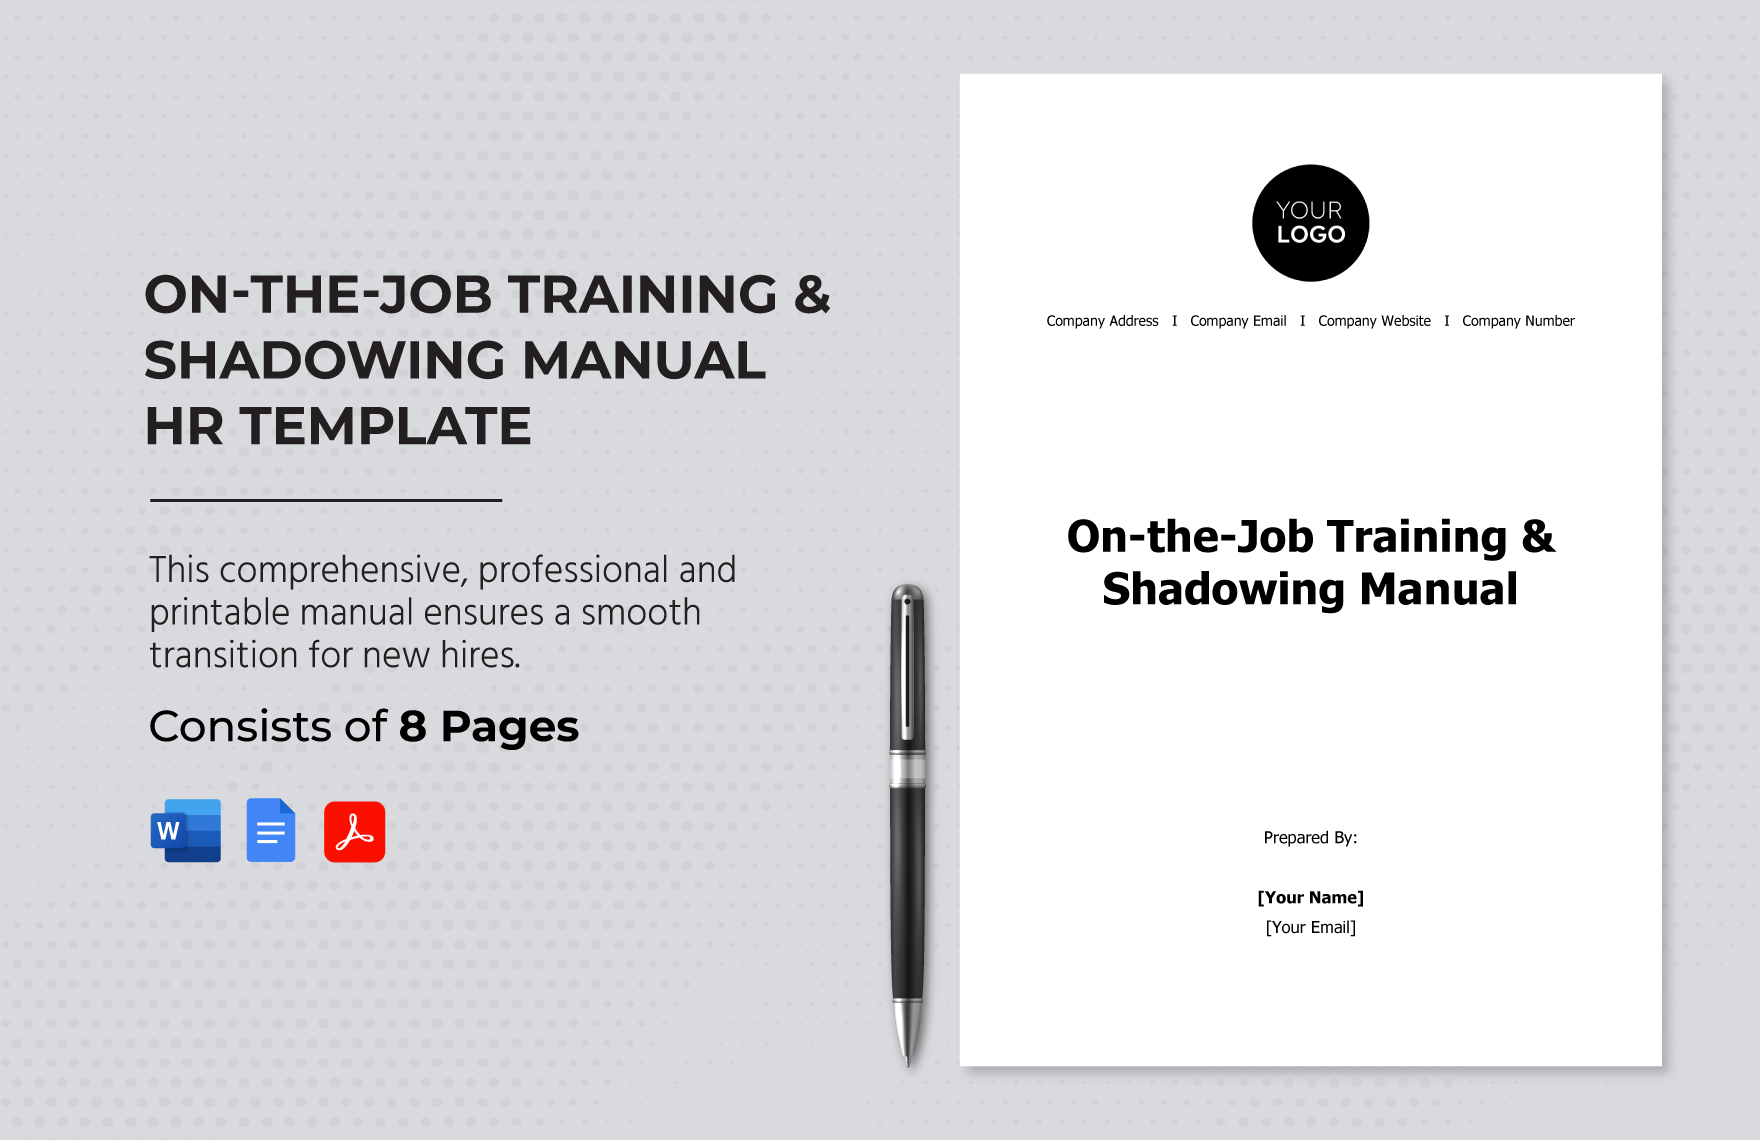 on-the-job-training-shadowing-manual-hr-template